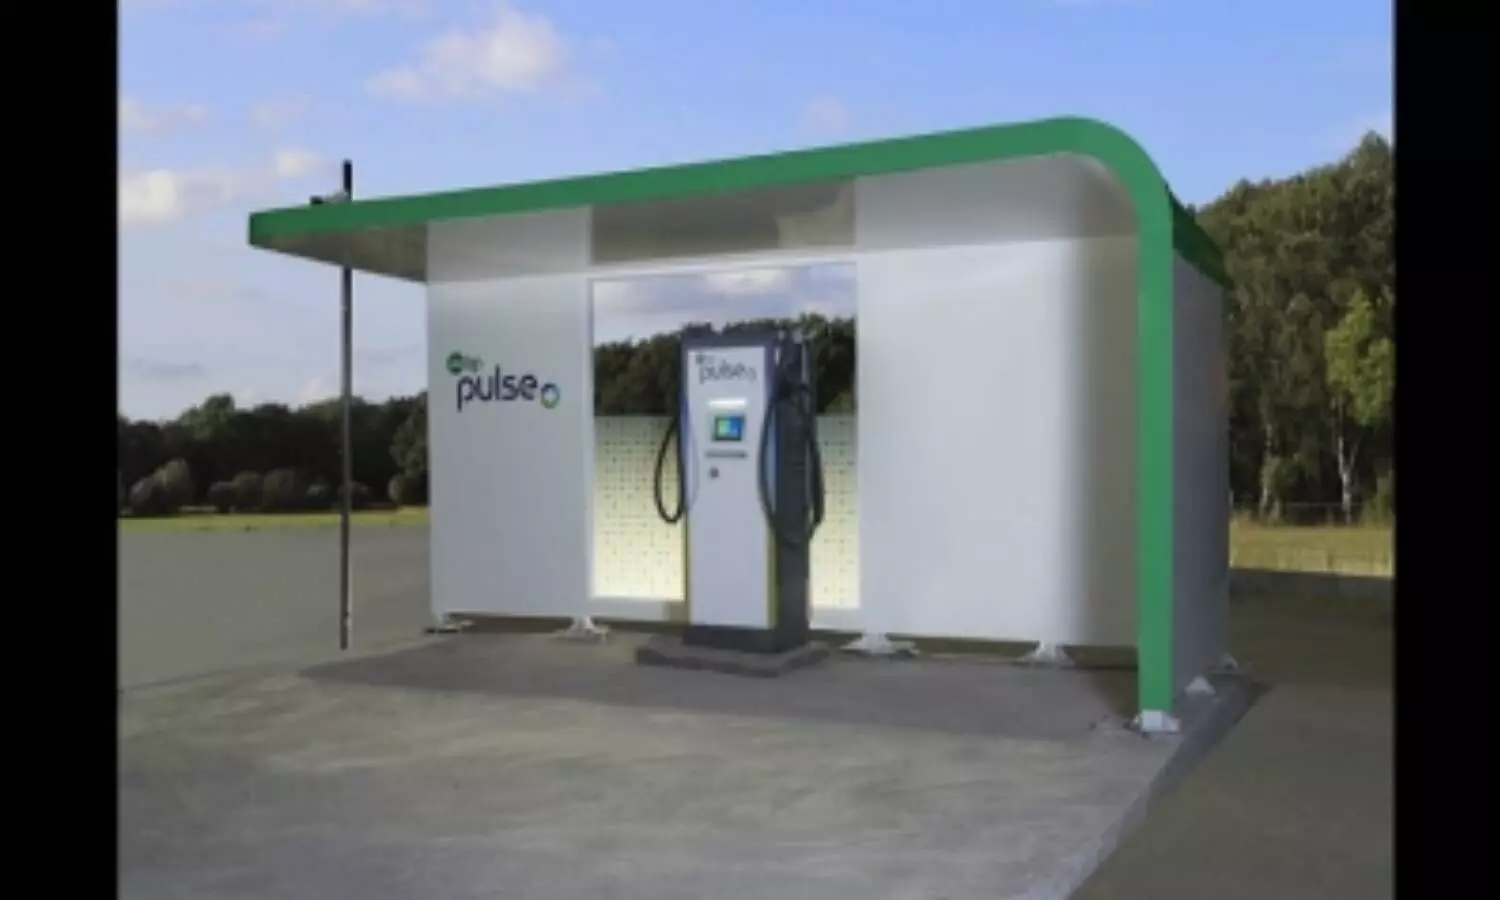 Jio-bp launches first Mobility Station providing multiple fueling, retail services